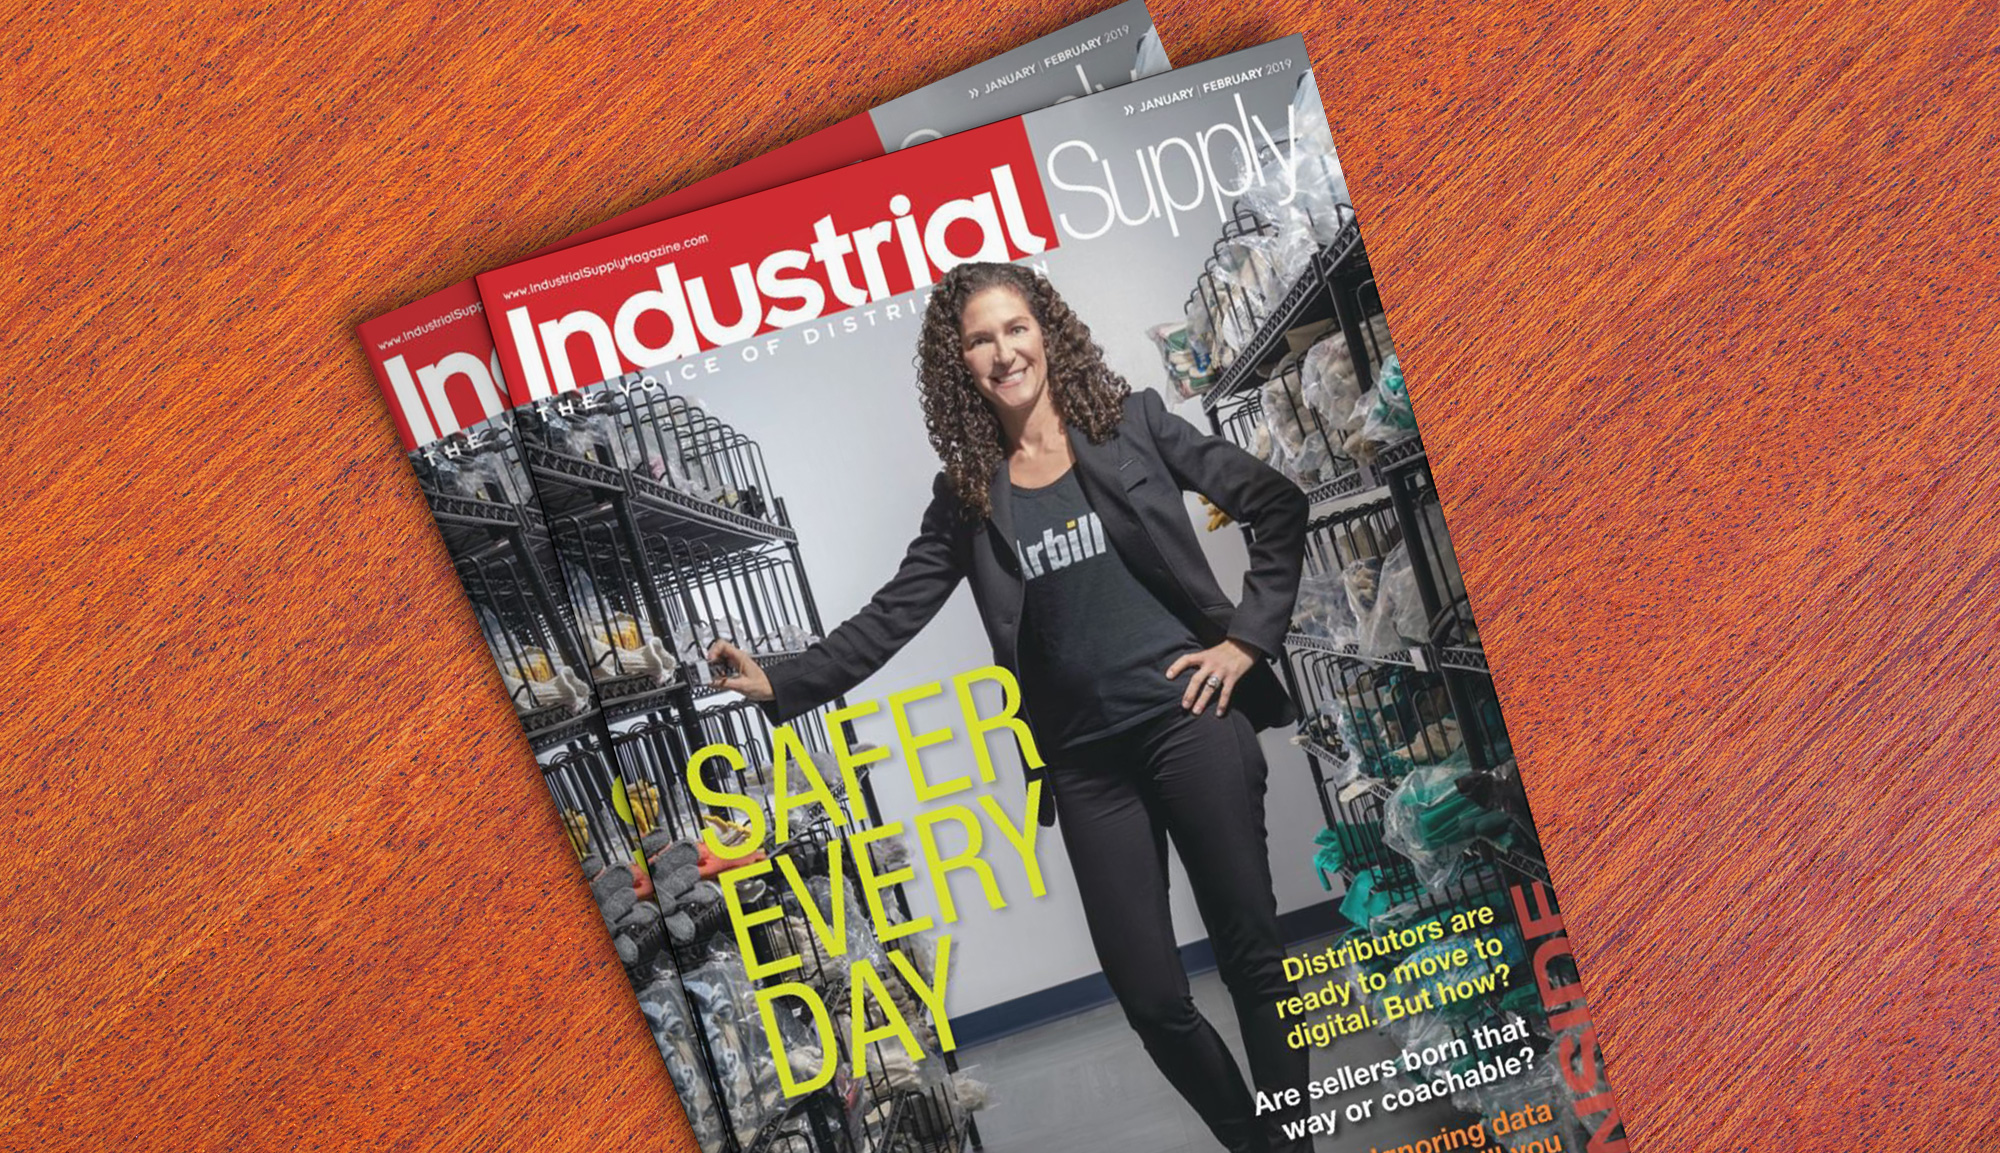 Arbill Is The Focus Of Industrial Supply Magazine’s Cover Story